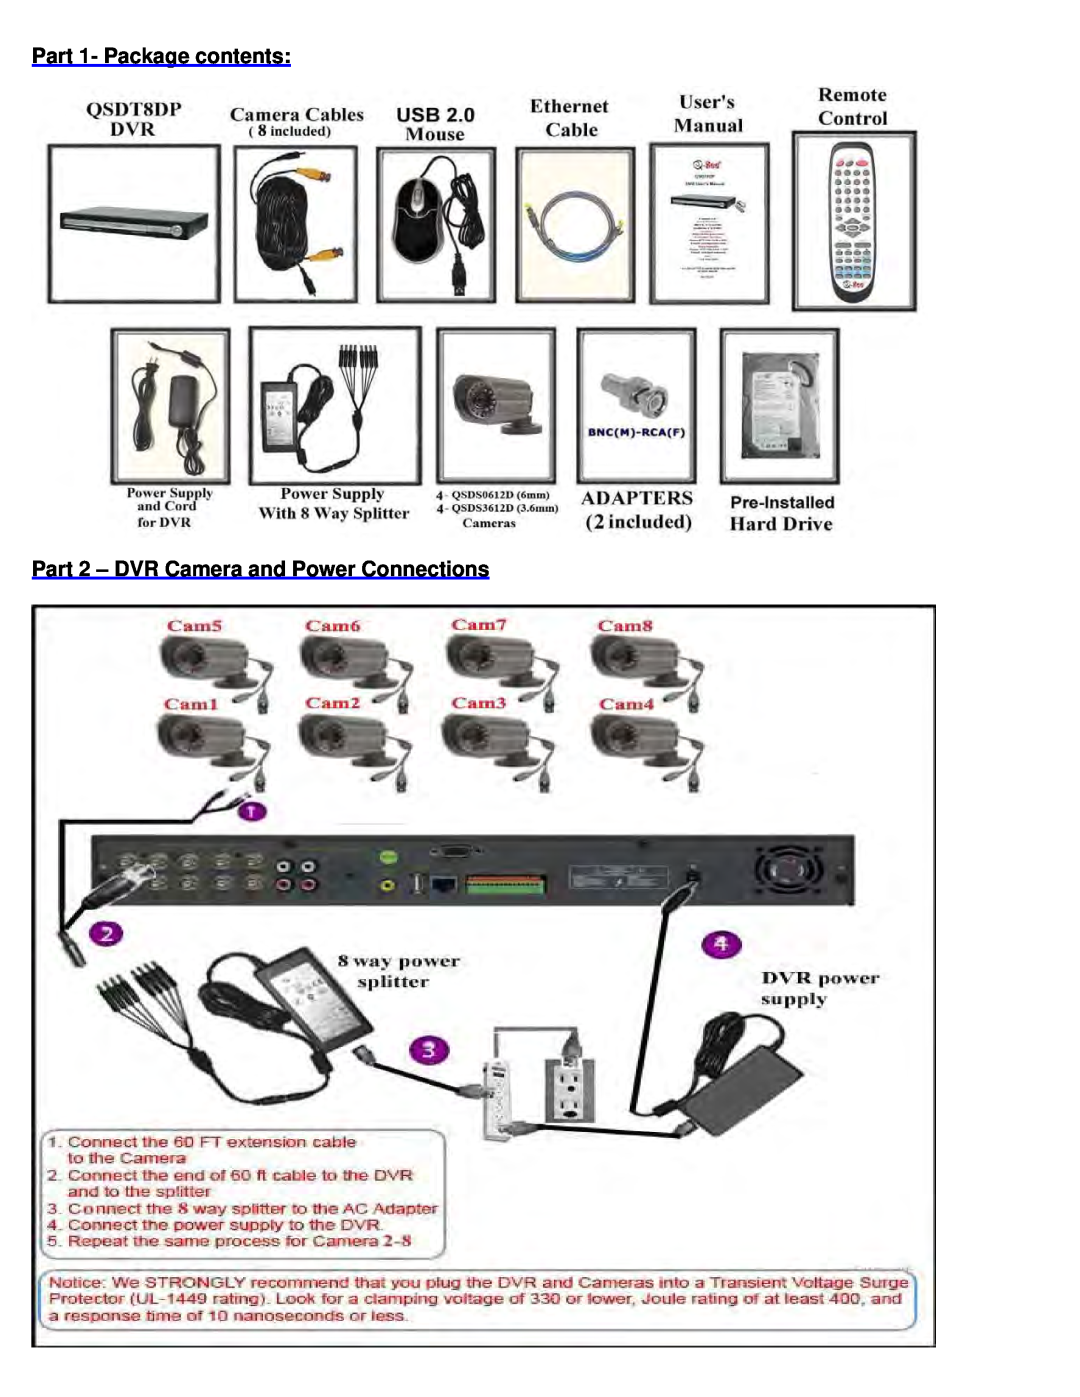 Q-See QT208-818 manual Part 1- Package contents, Part 2 - DVR Camera and Power Connections 